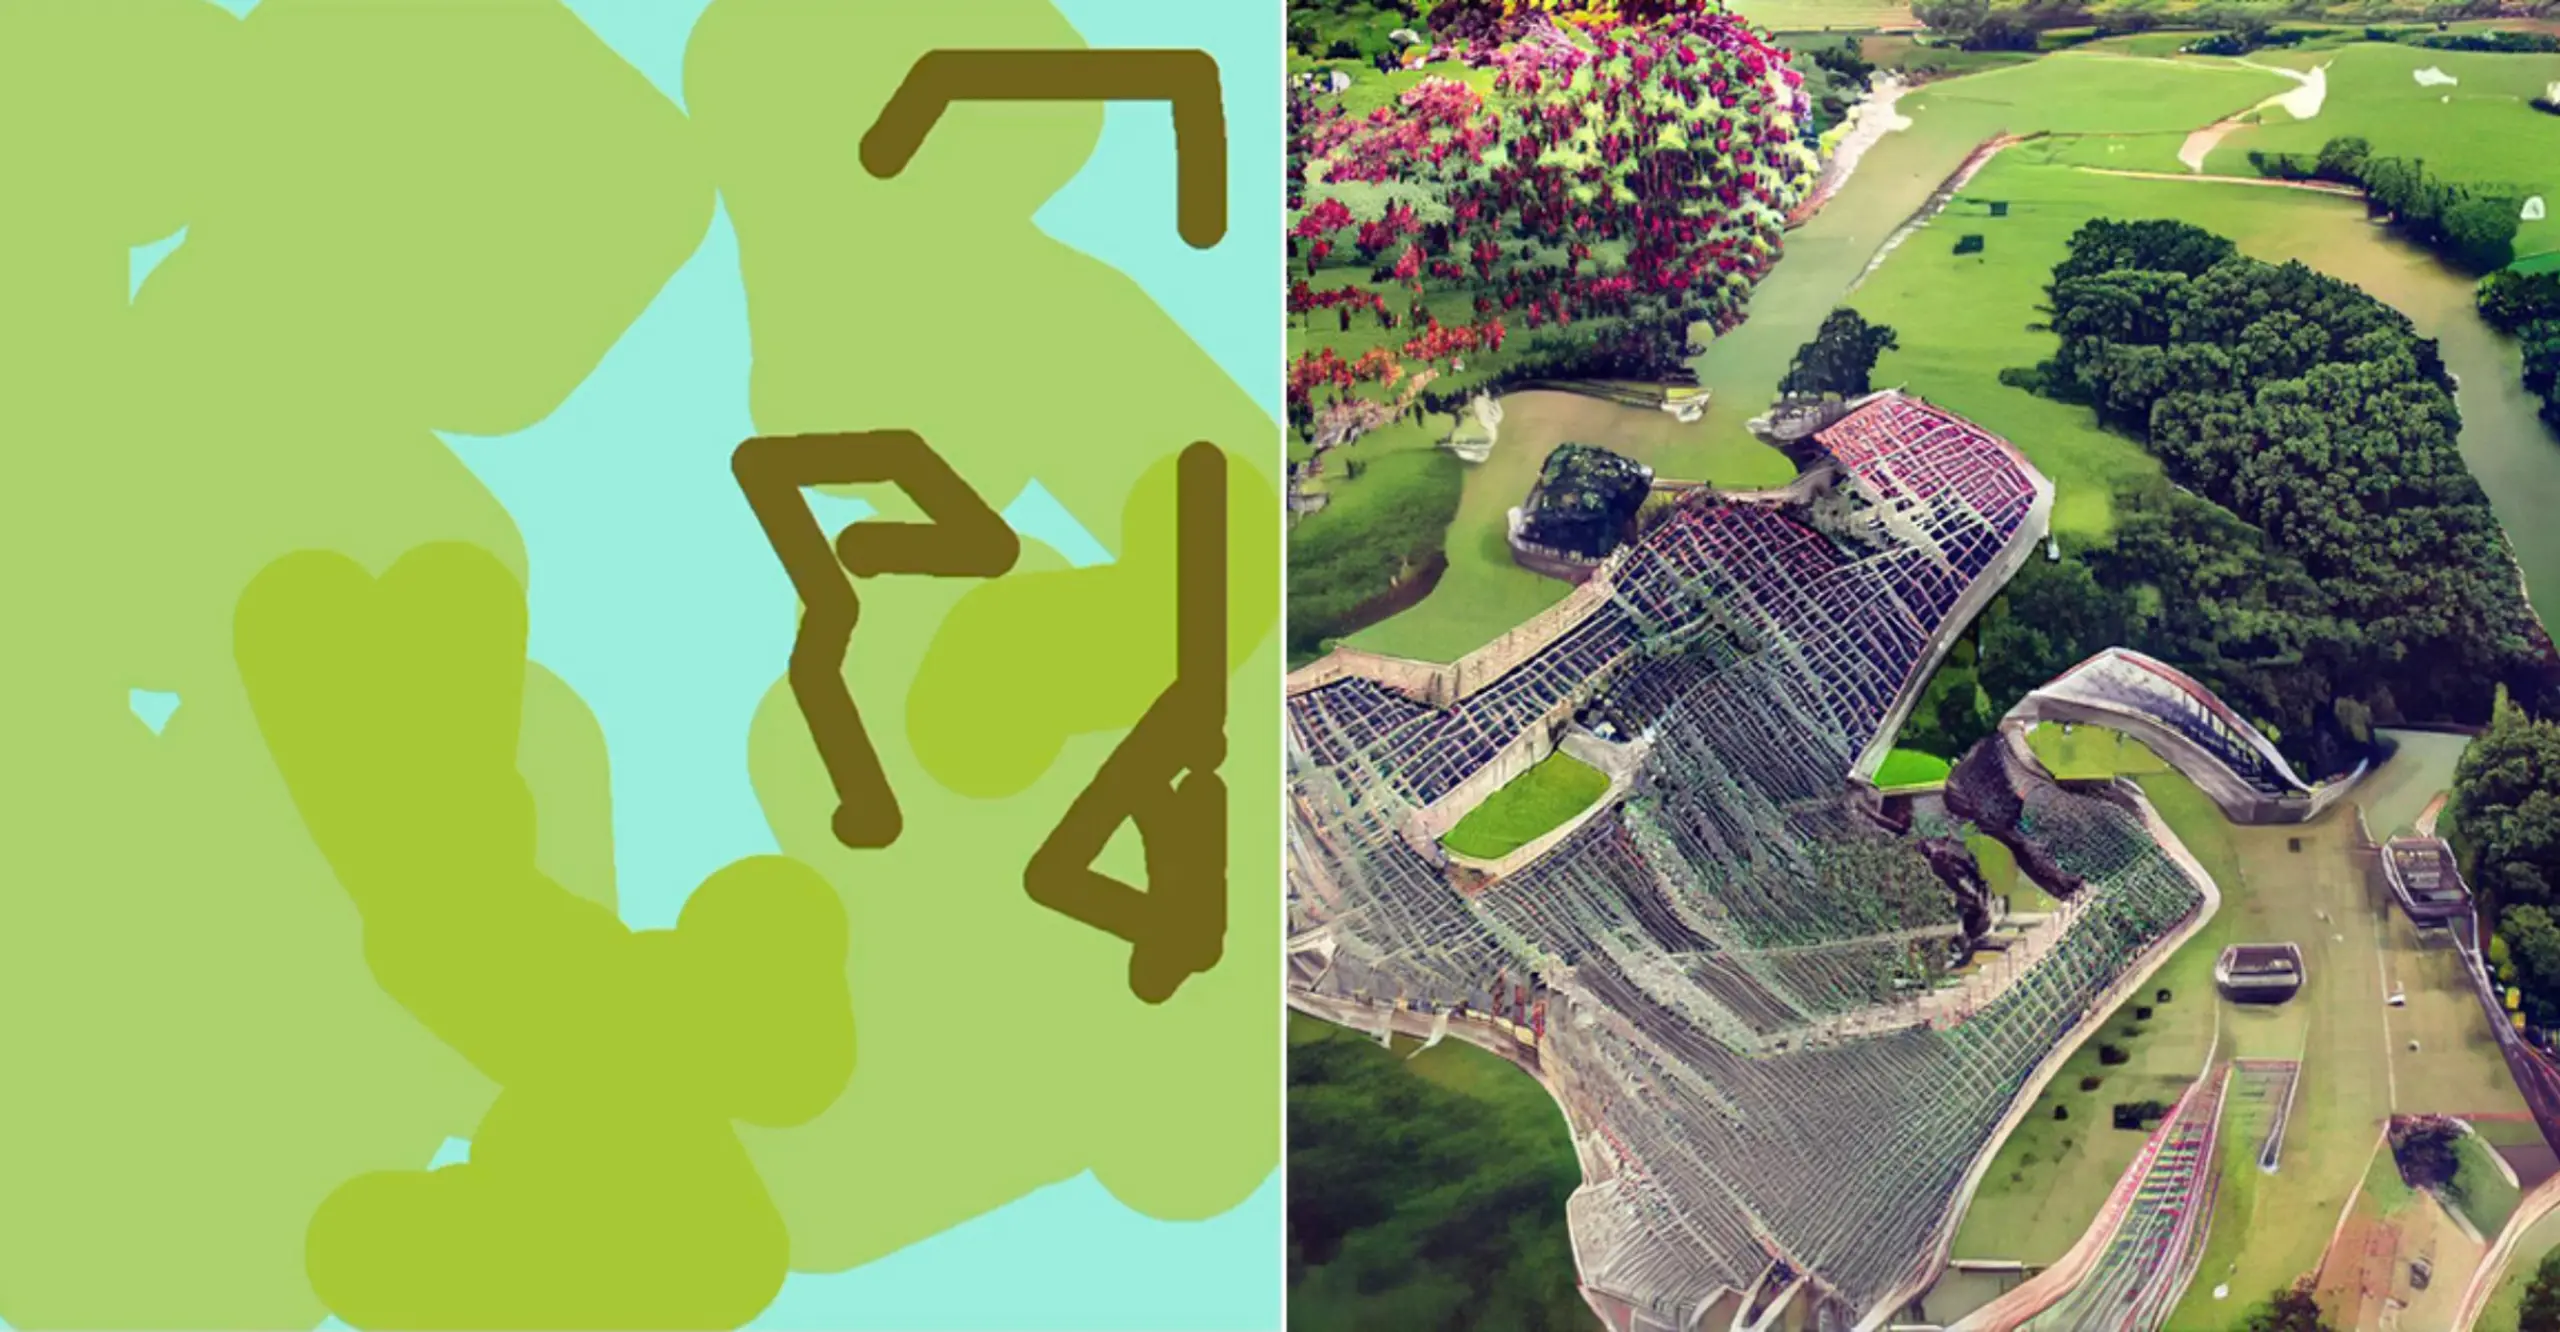 A diptych with a drawing using green, blue and brown colours, and aerial view of a landscape with some digital glitches